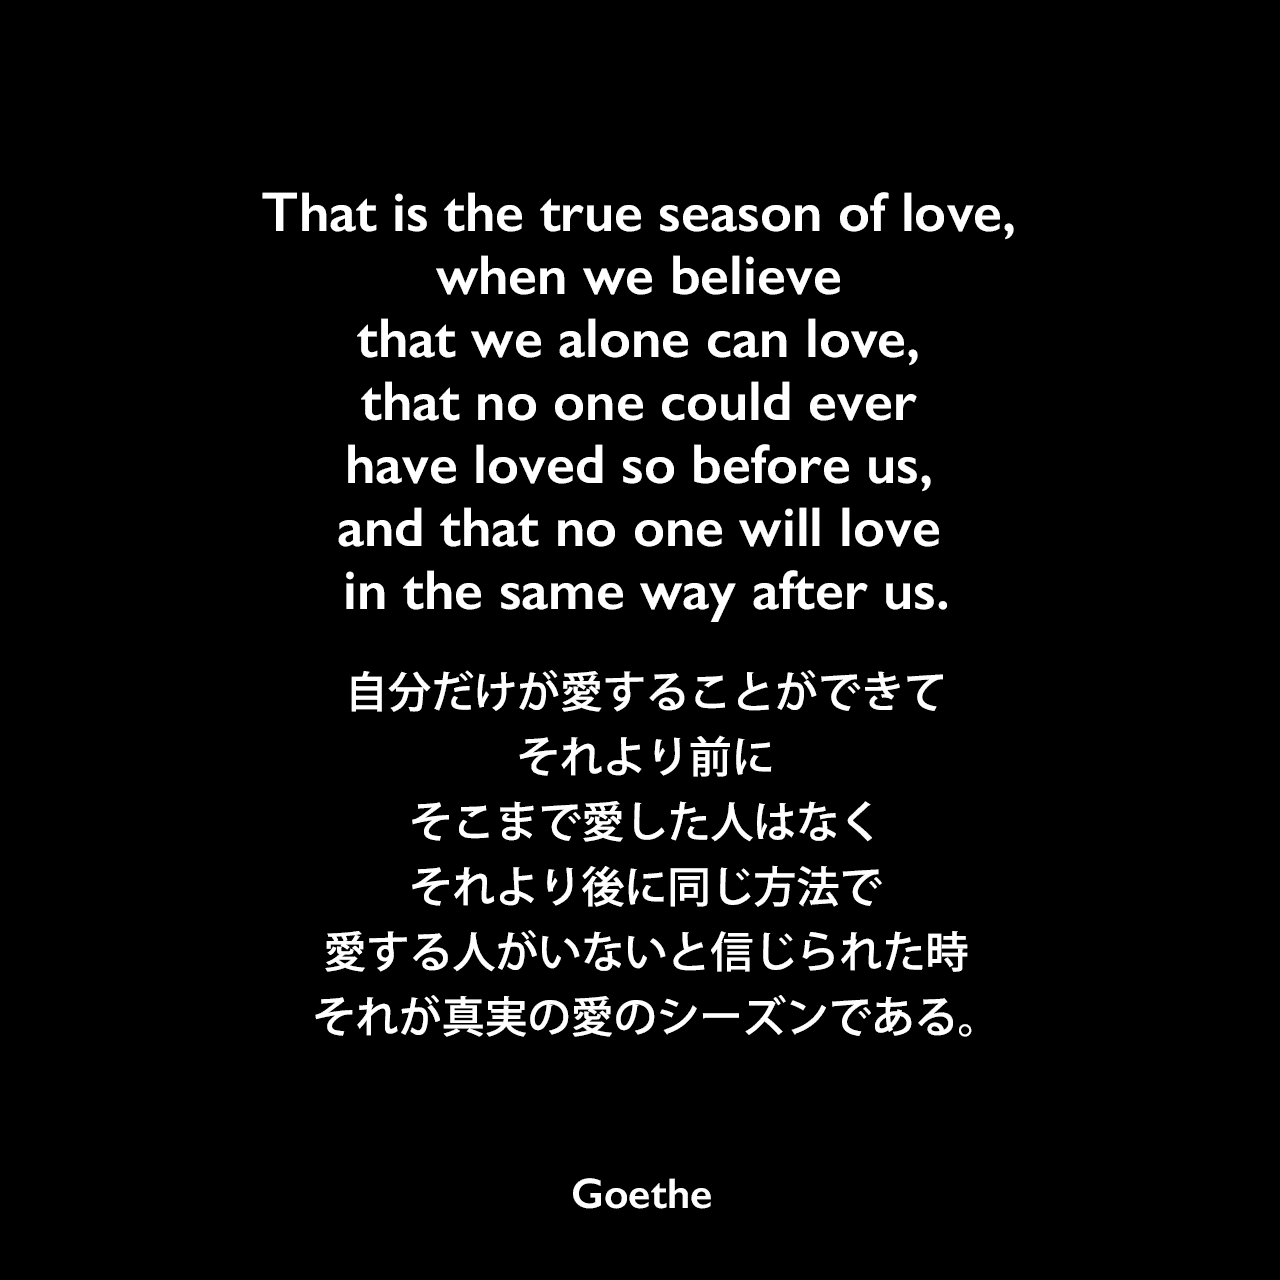 That is the true season of love, when we believe that we alone can love, that no one could ever have loved so before us, and that no one will love in the same way after us.自分だけが愛することができて、それより前にそこまで愛した人はなく、それより後に同じ方法で愛する人がいないと信じられた時、それが真実の愛のシーズンである。Johann Wolfgang von Goethe